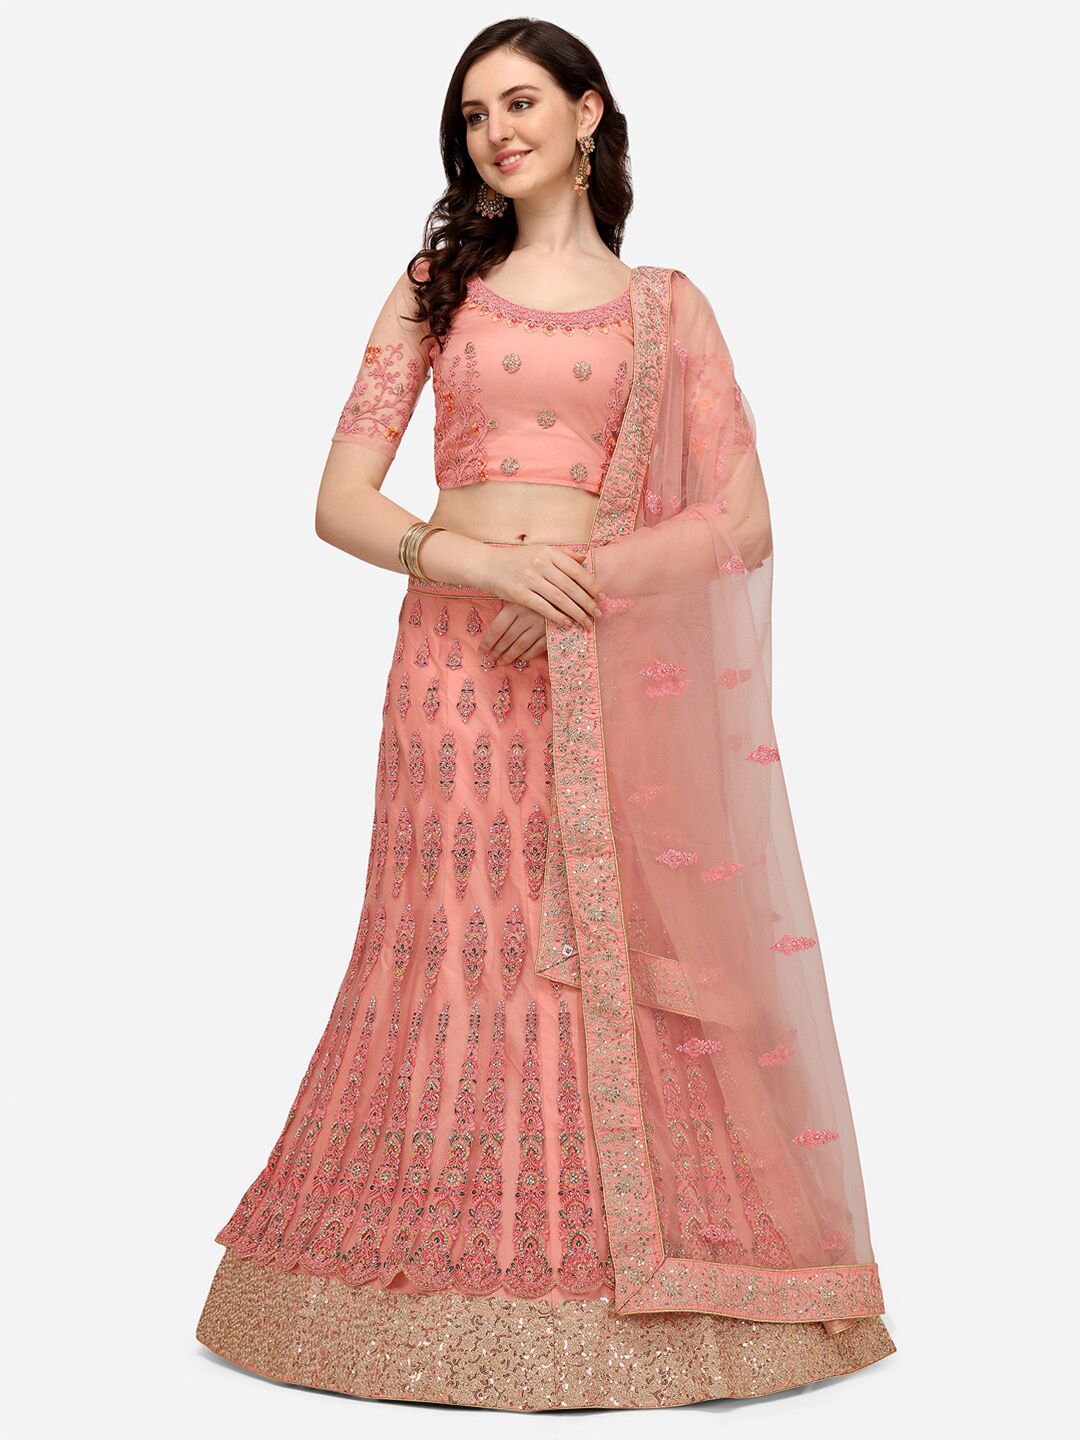 VRSALES Pink Embroidered Semi-Stitched Lehenga & Unstitched Blouse With Dupatta Price in India